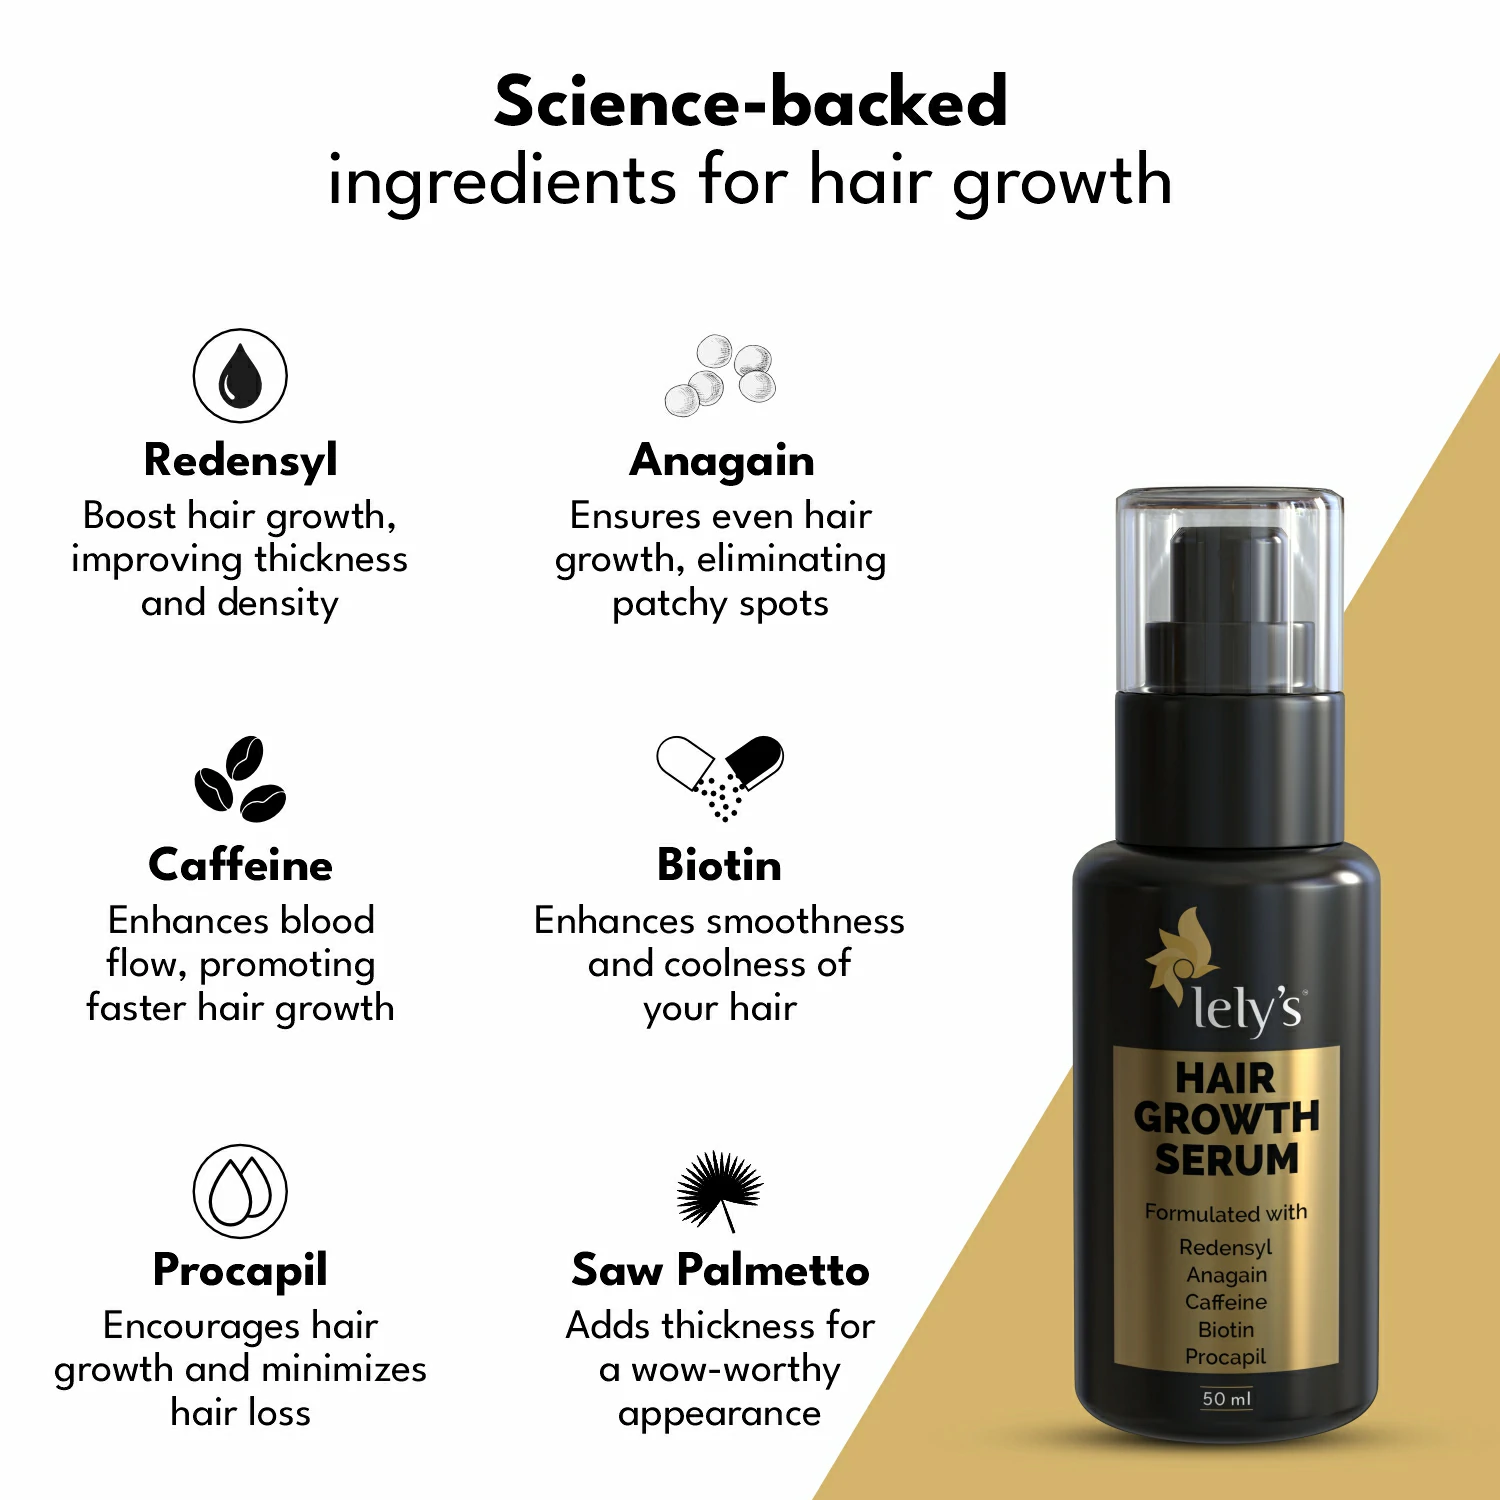 Proven ingredients for hair growth